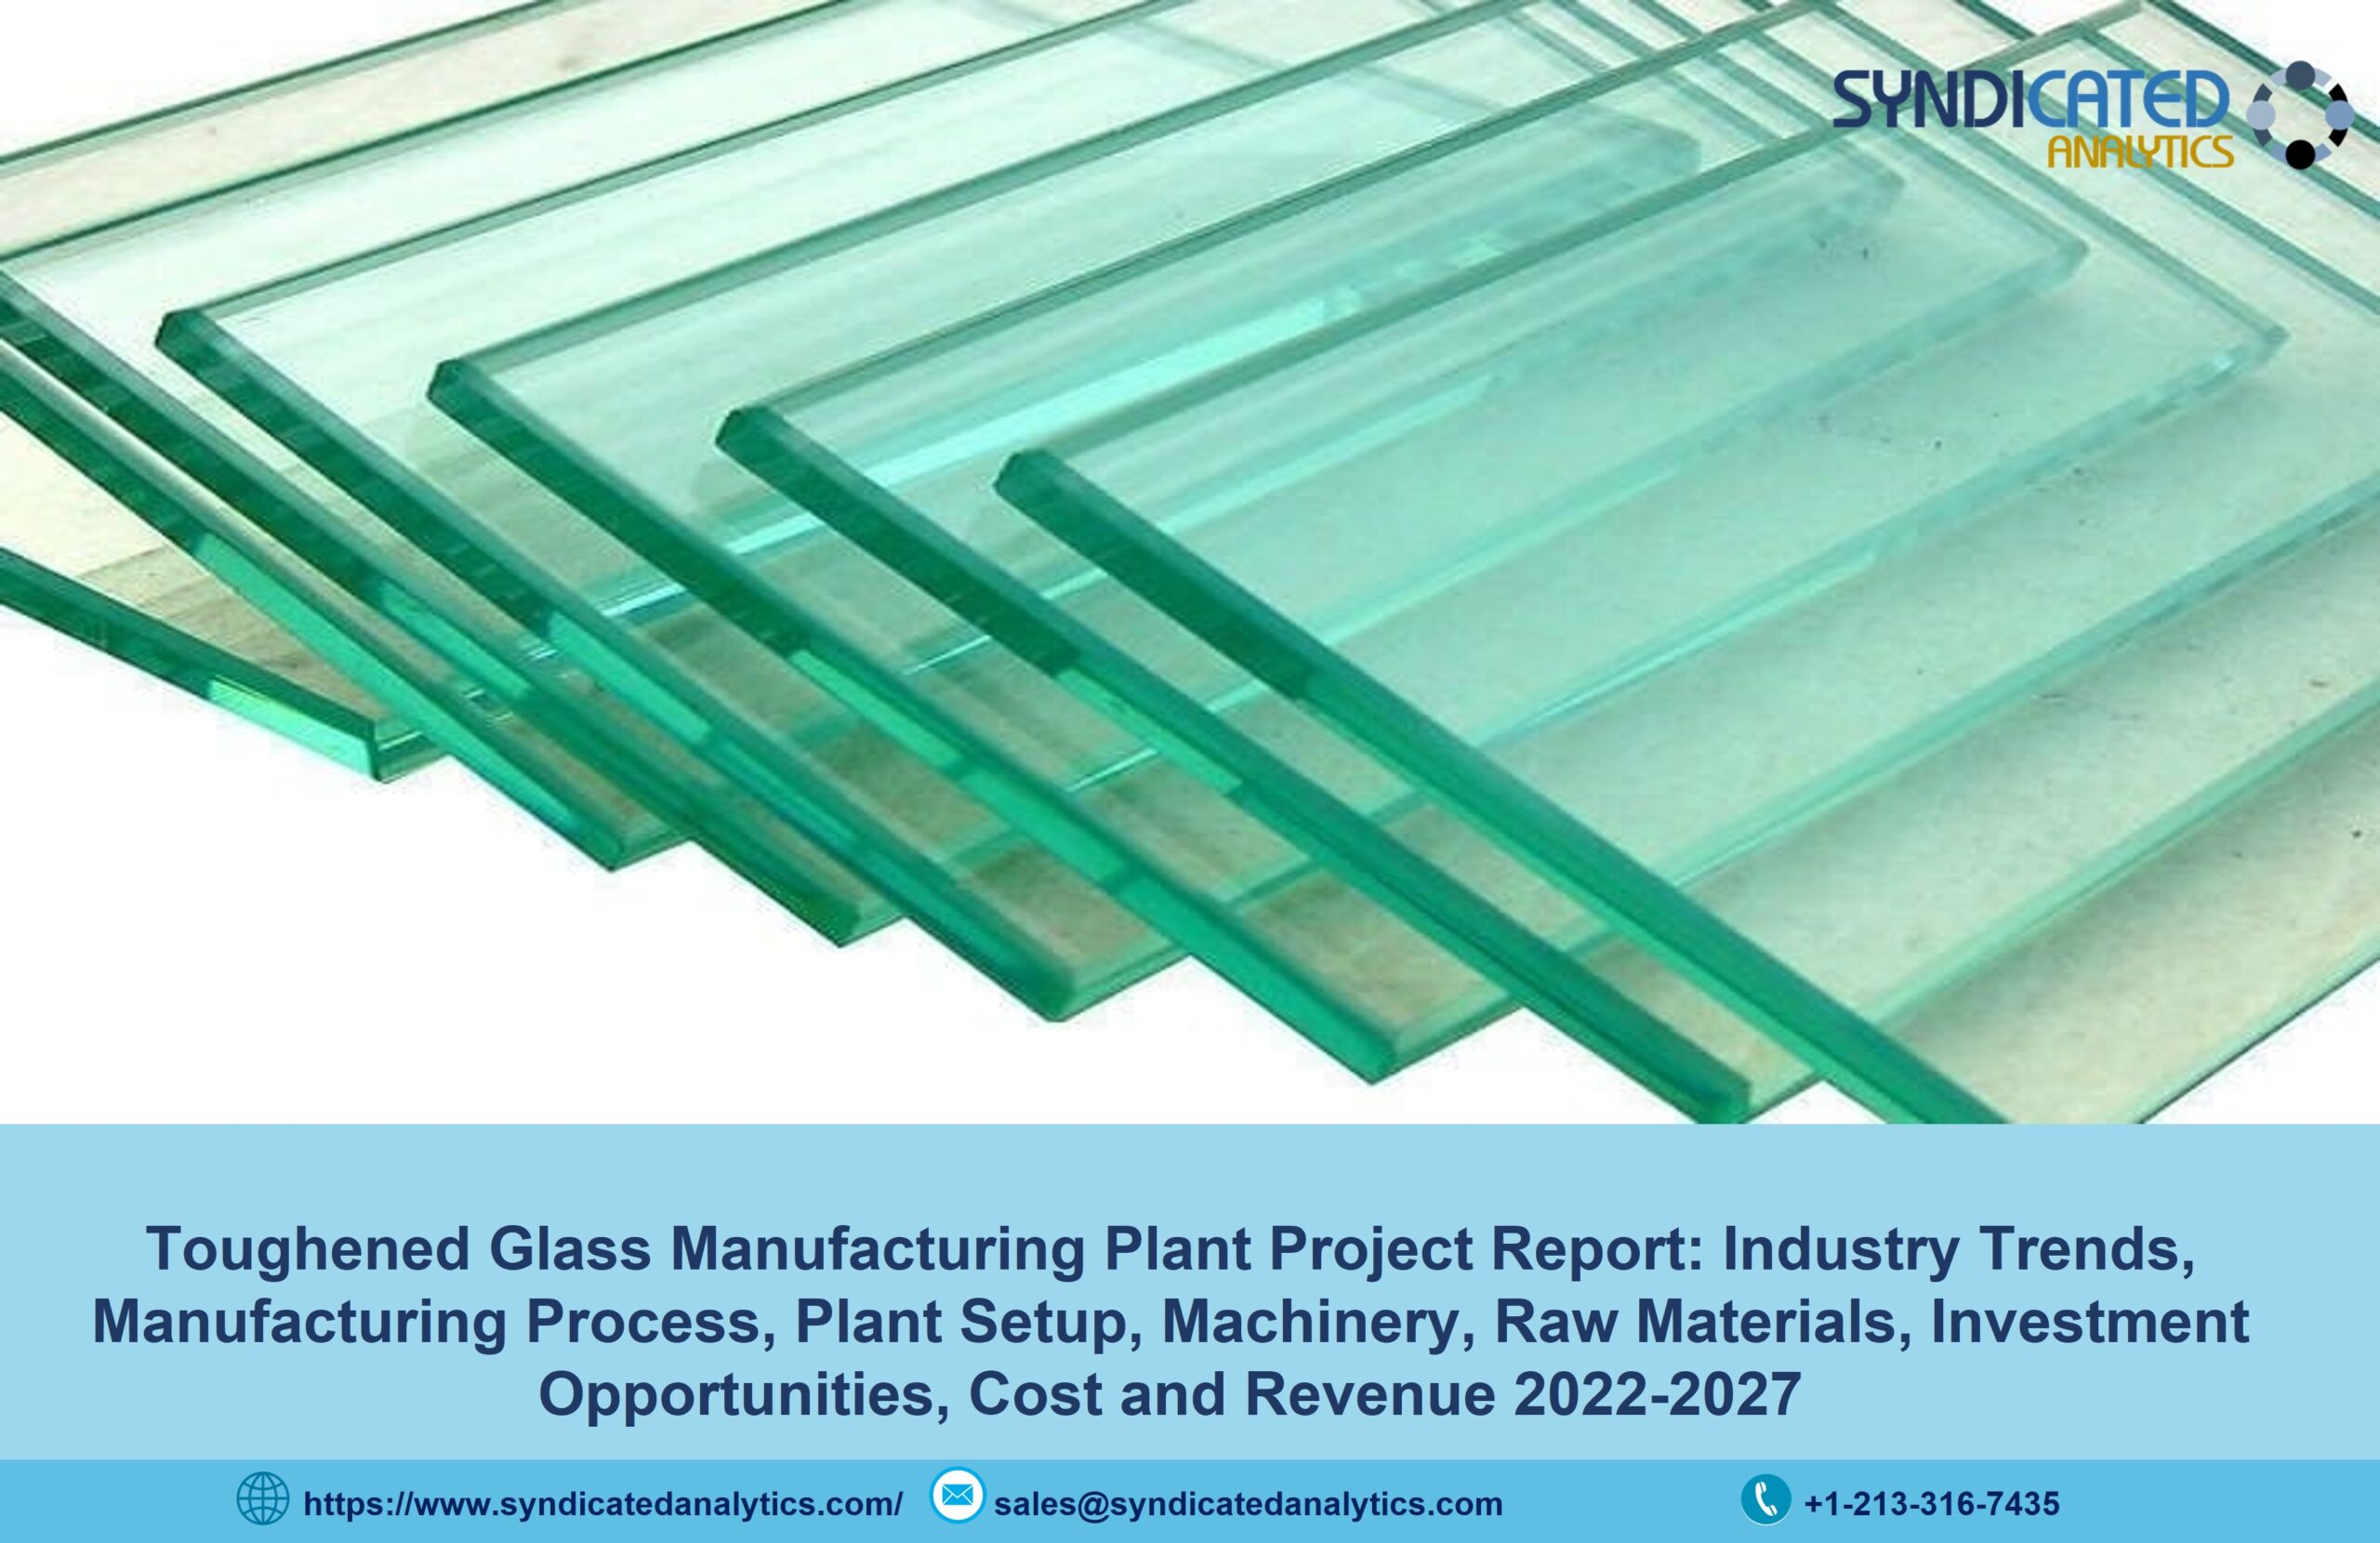 Toughened Glass Manufacturing Plant Cost